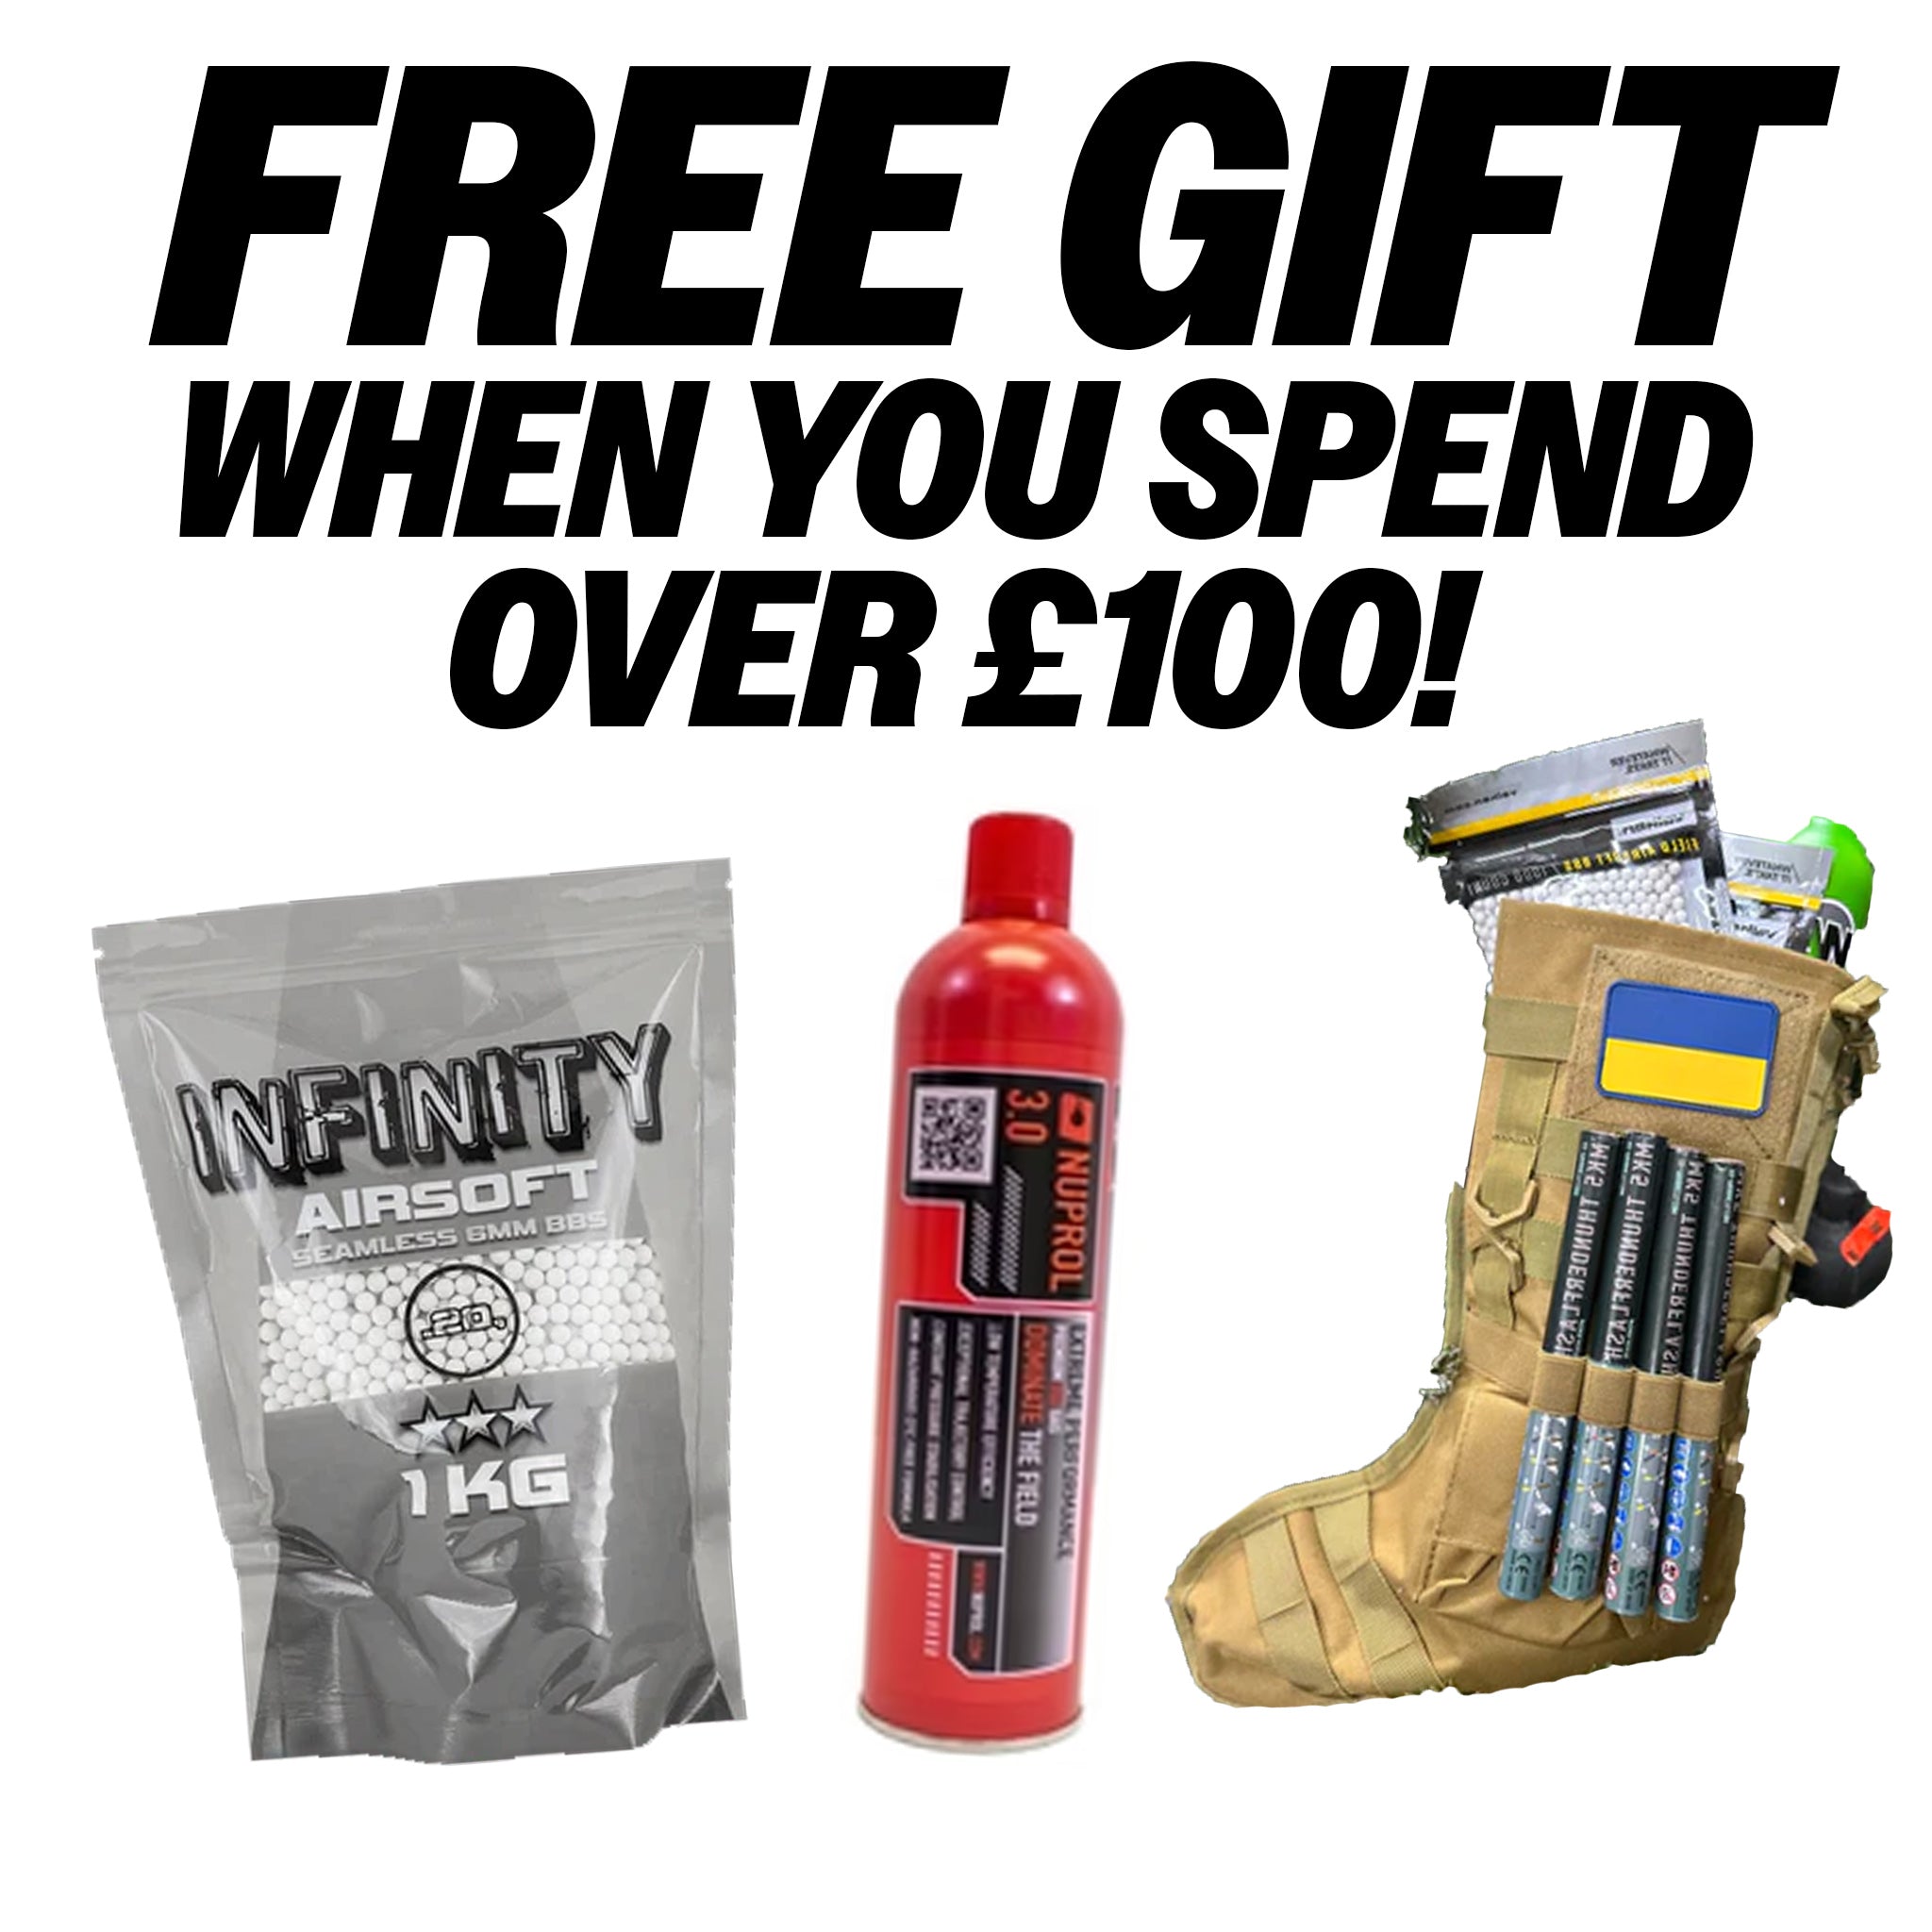 Spend over £100 get a free Gift!